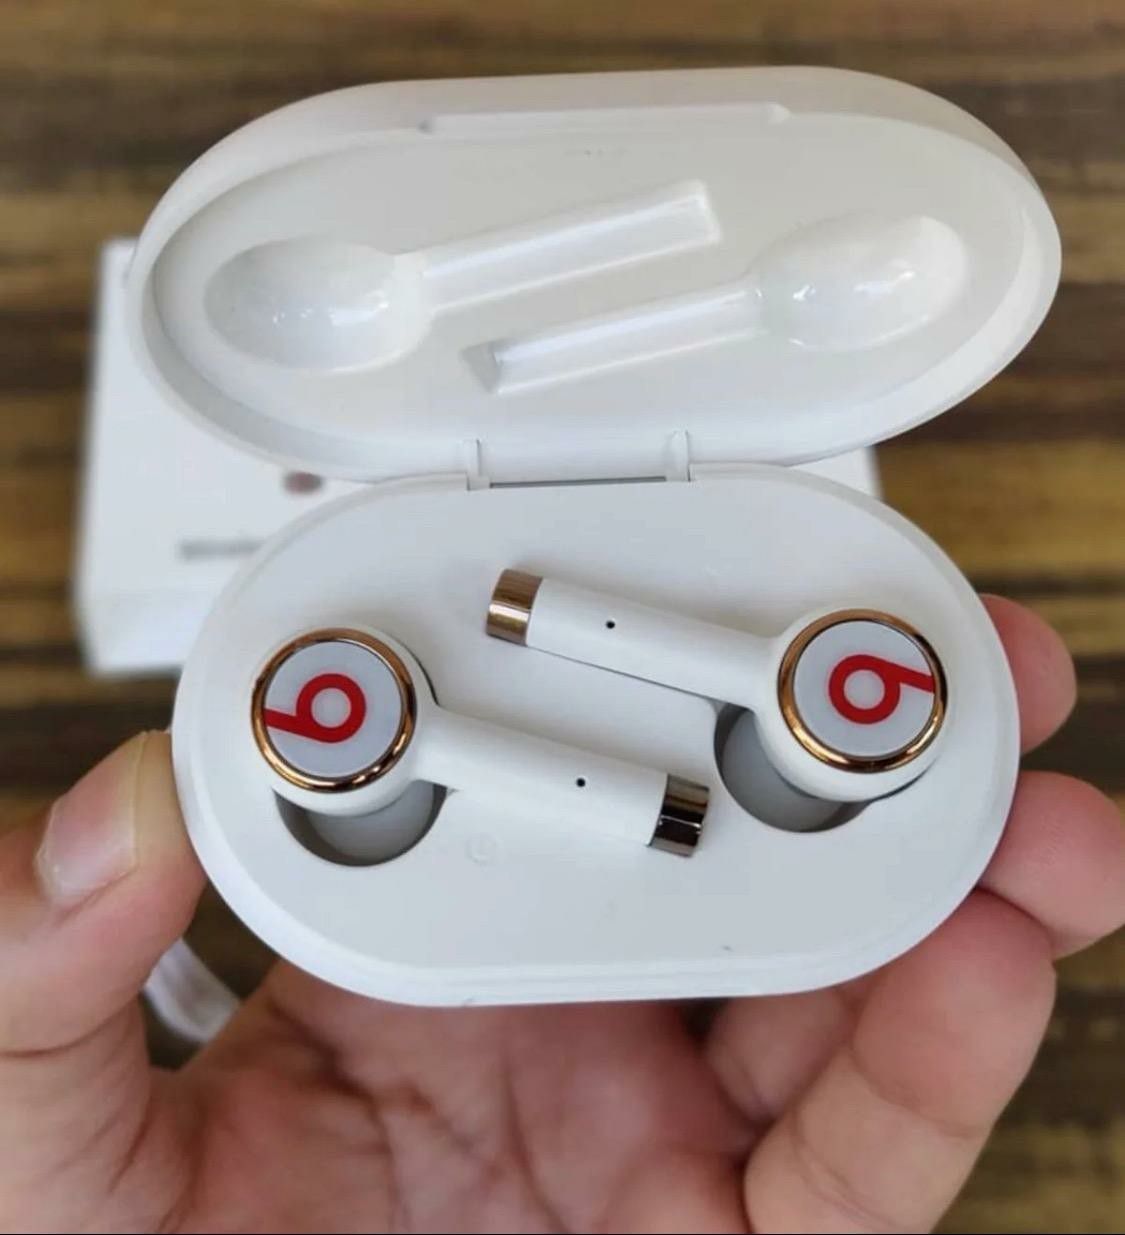 New 🔥🔥🔥Beats Tour 3 Wireless by Dr. Dre 🔥🔥In Ear Headphones 2,HOT Colors 🔥 🔥🔥White 🔥🔥Black